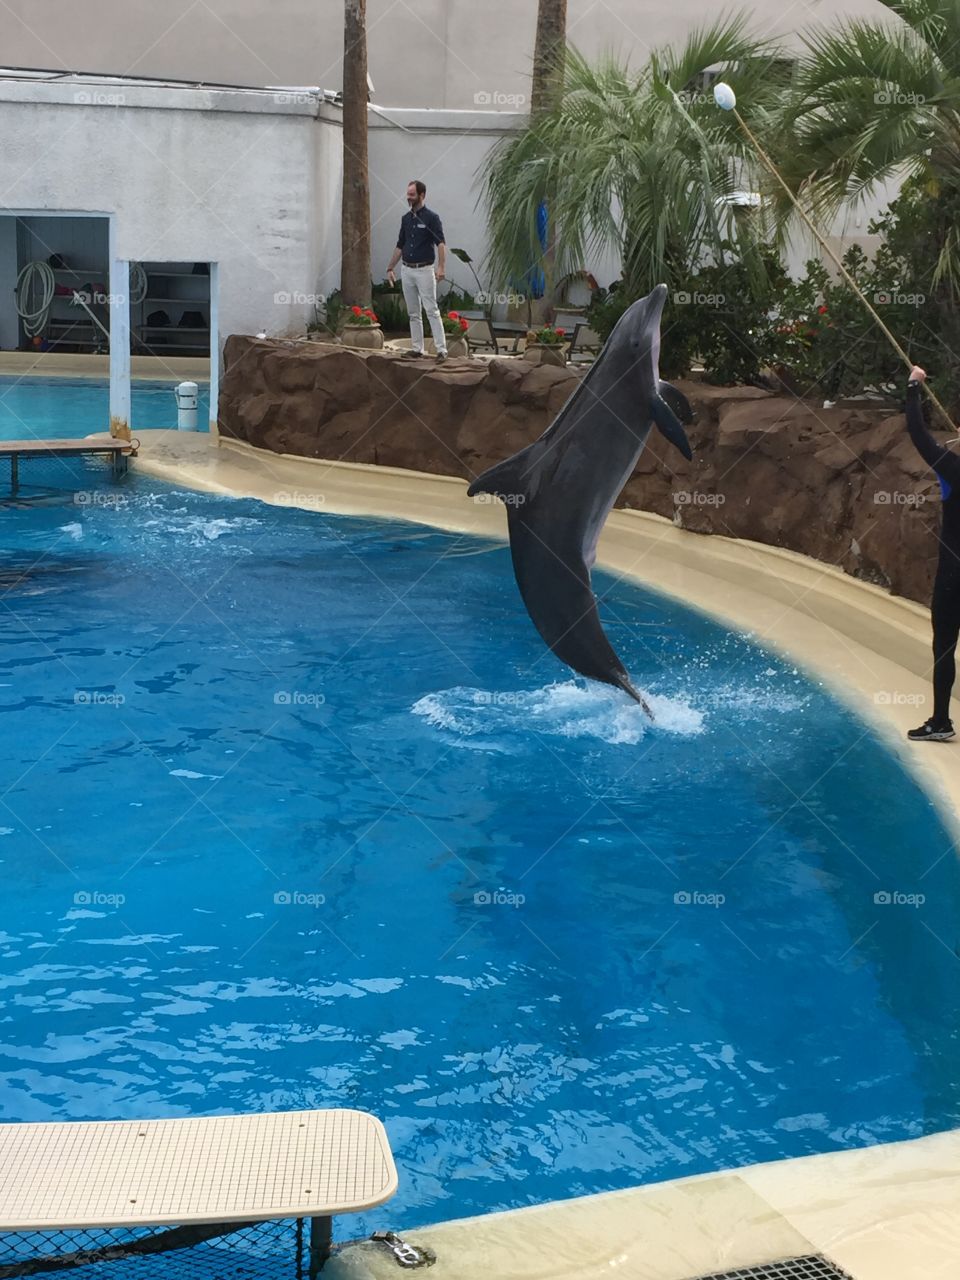 Dolphin jumps from pool to retrieve a treat at the Dolphin Habitat in The Mirage, Las Vegas. 